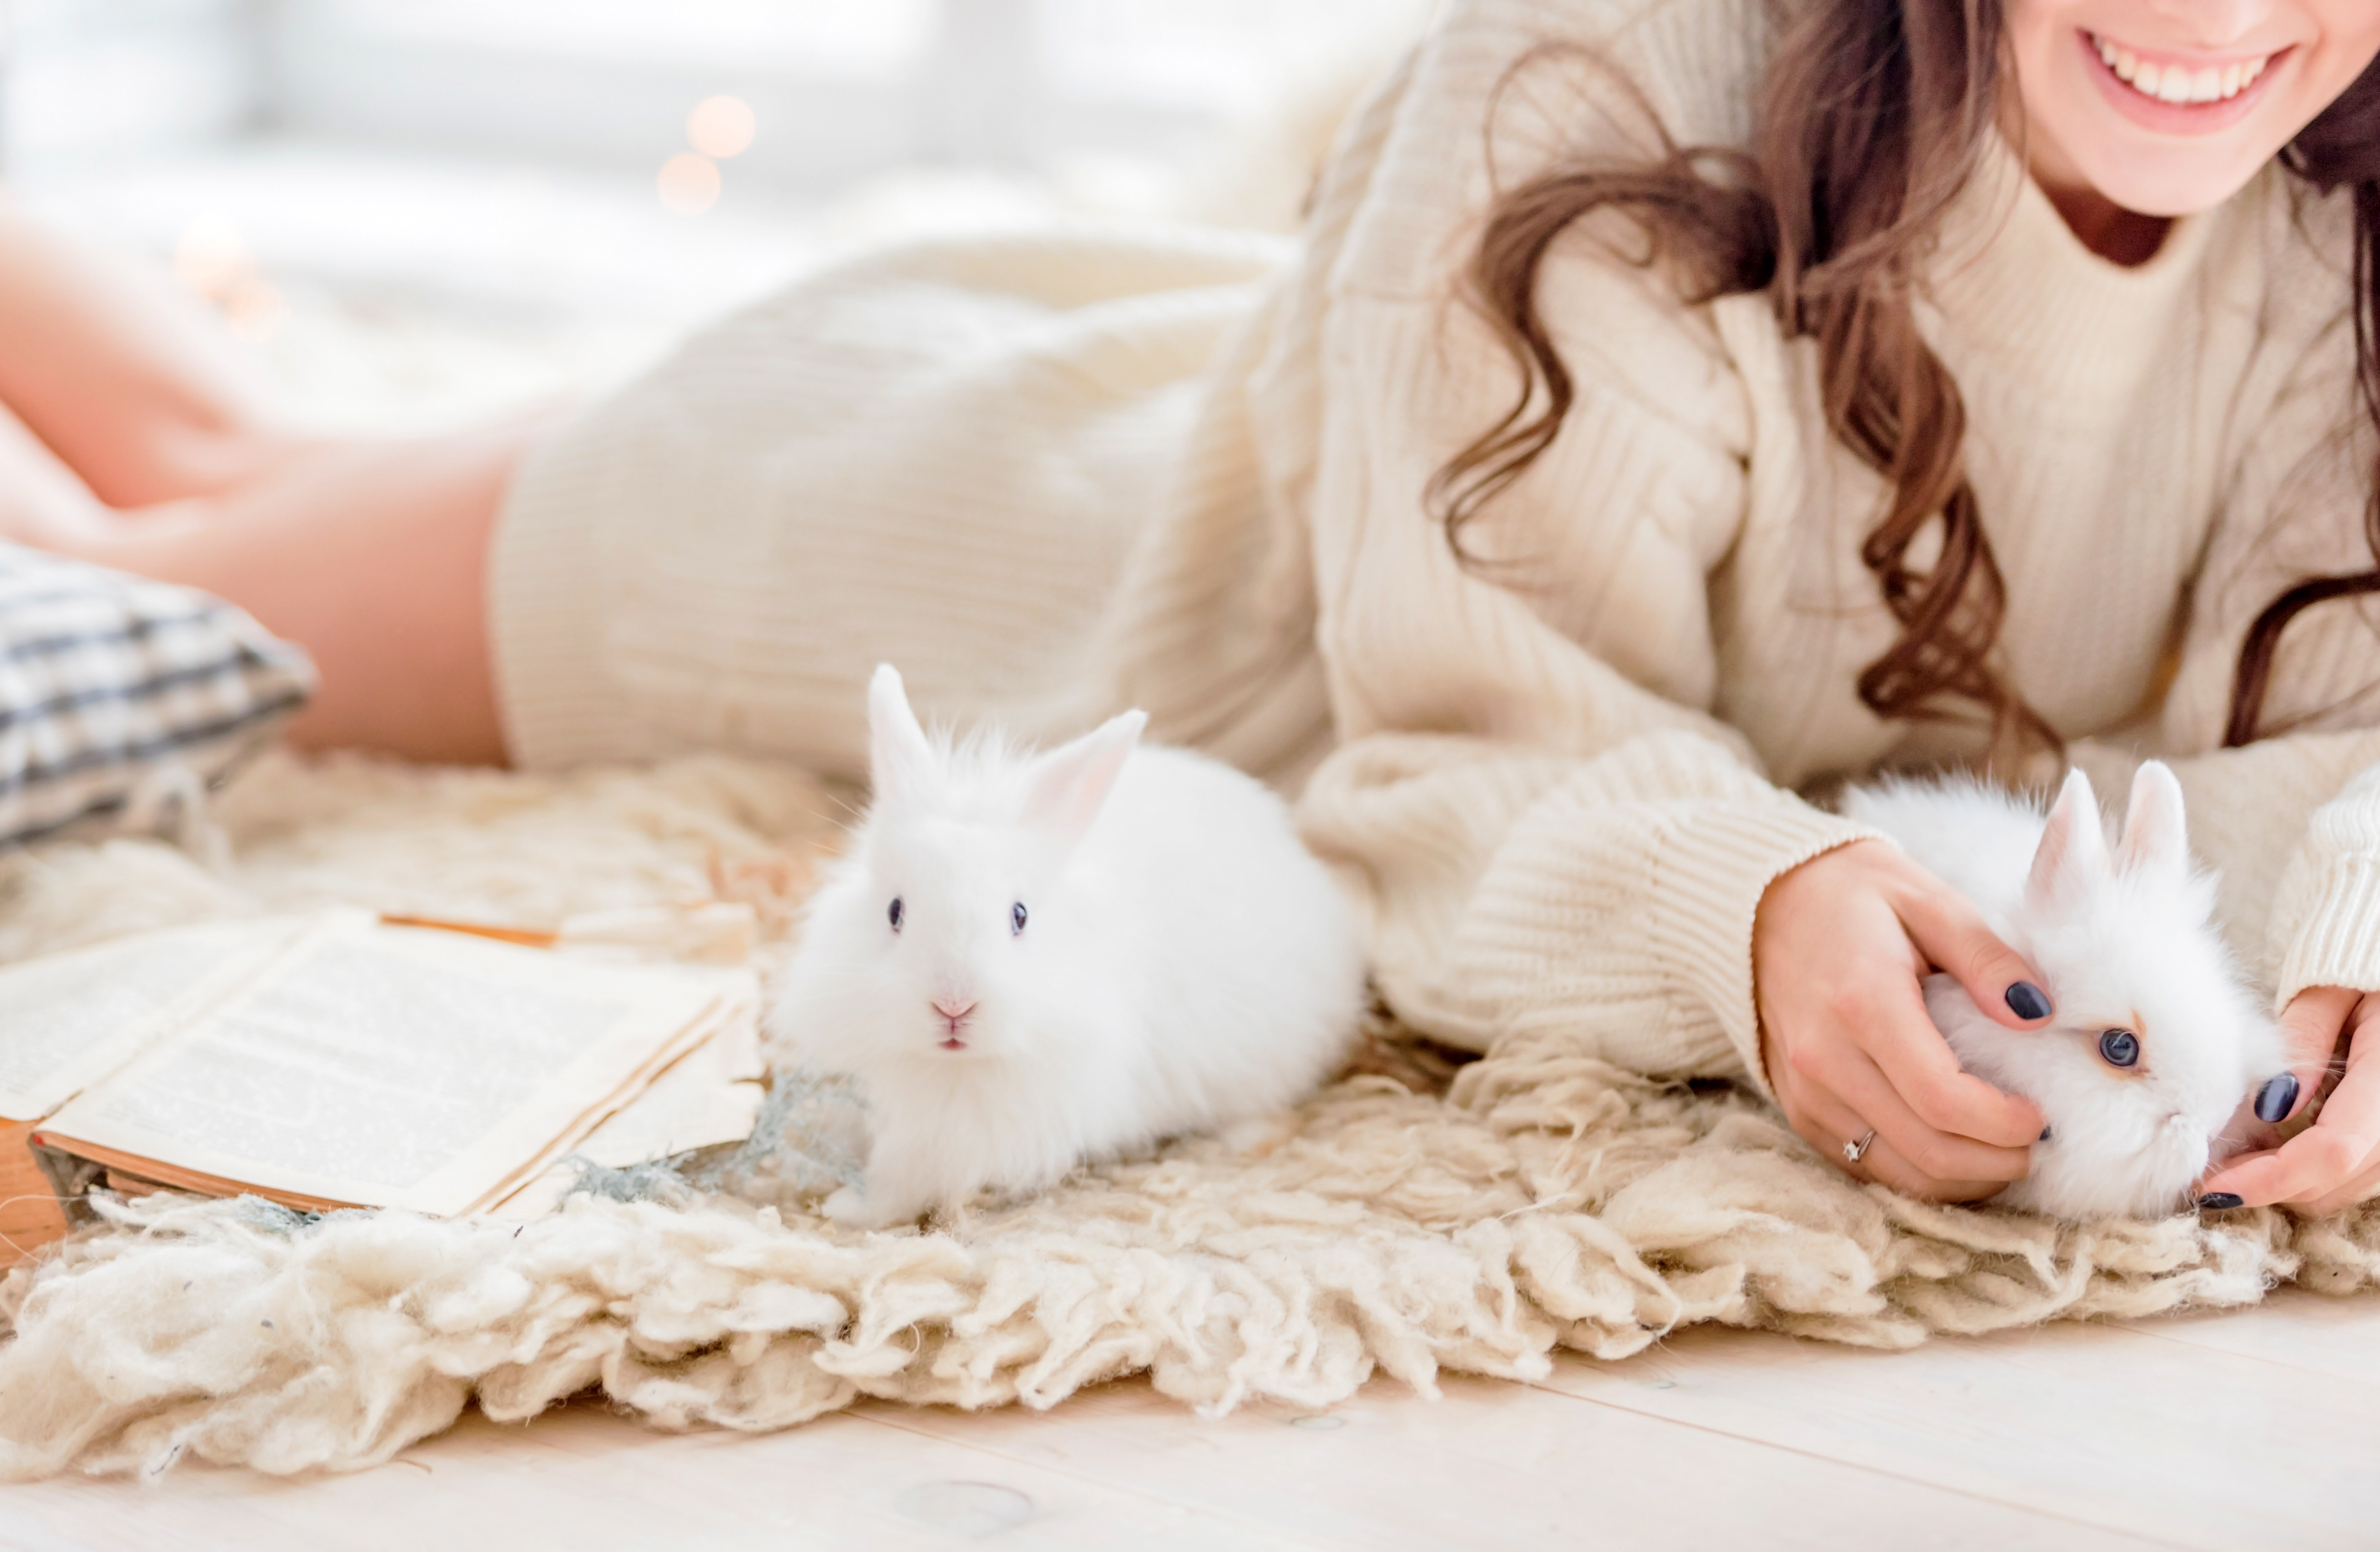 Bringing Home Bunny: 8 Helpful Bunny Care Tips to Keep Your Rabbit Healthy